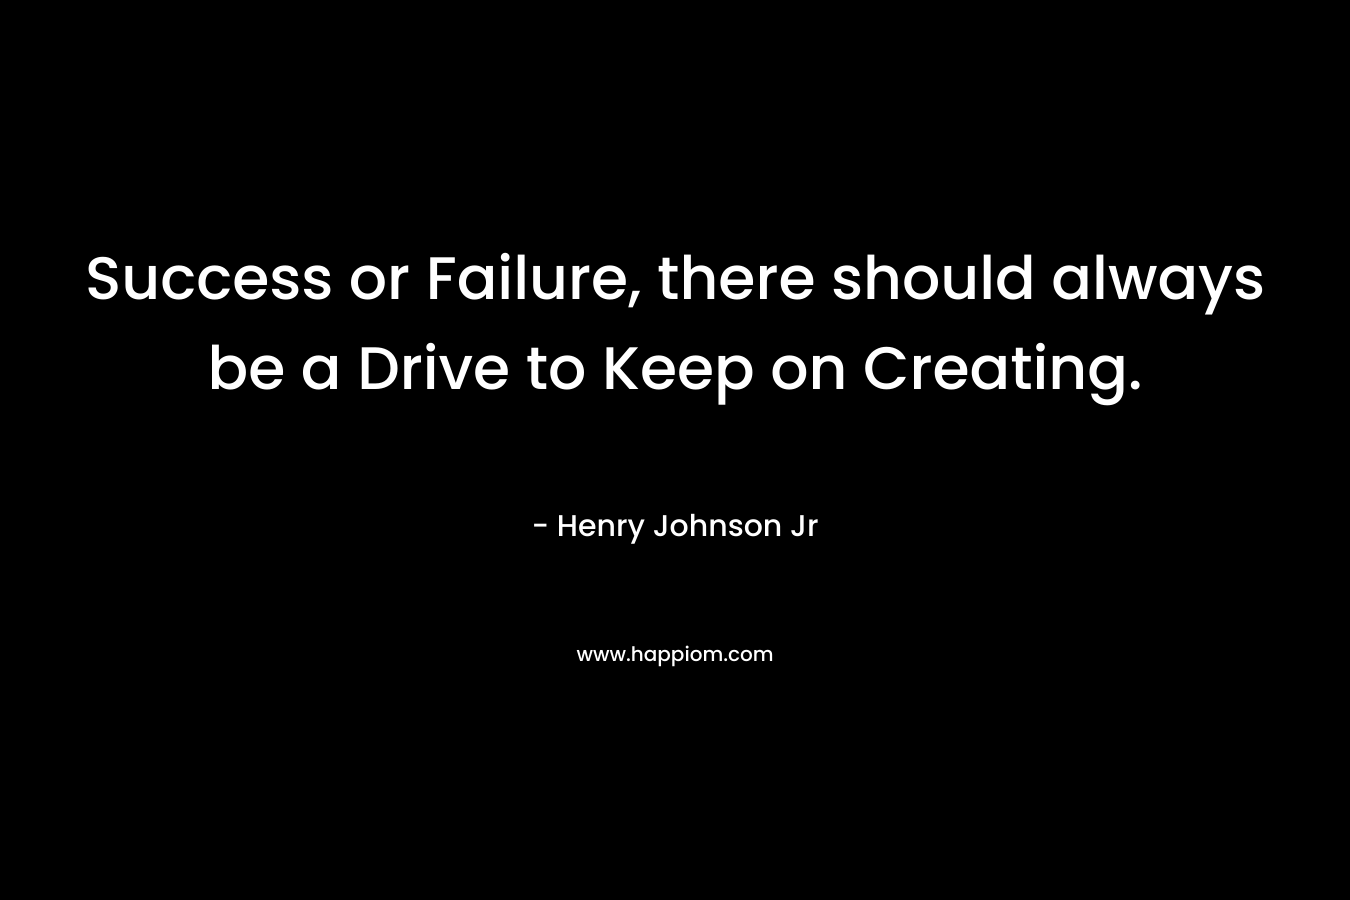 Success or Failure, there should always be a Drive to Keep on Creating. – Henry Johnson Jr